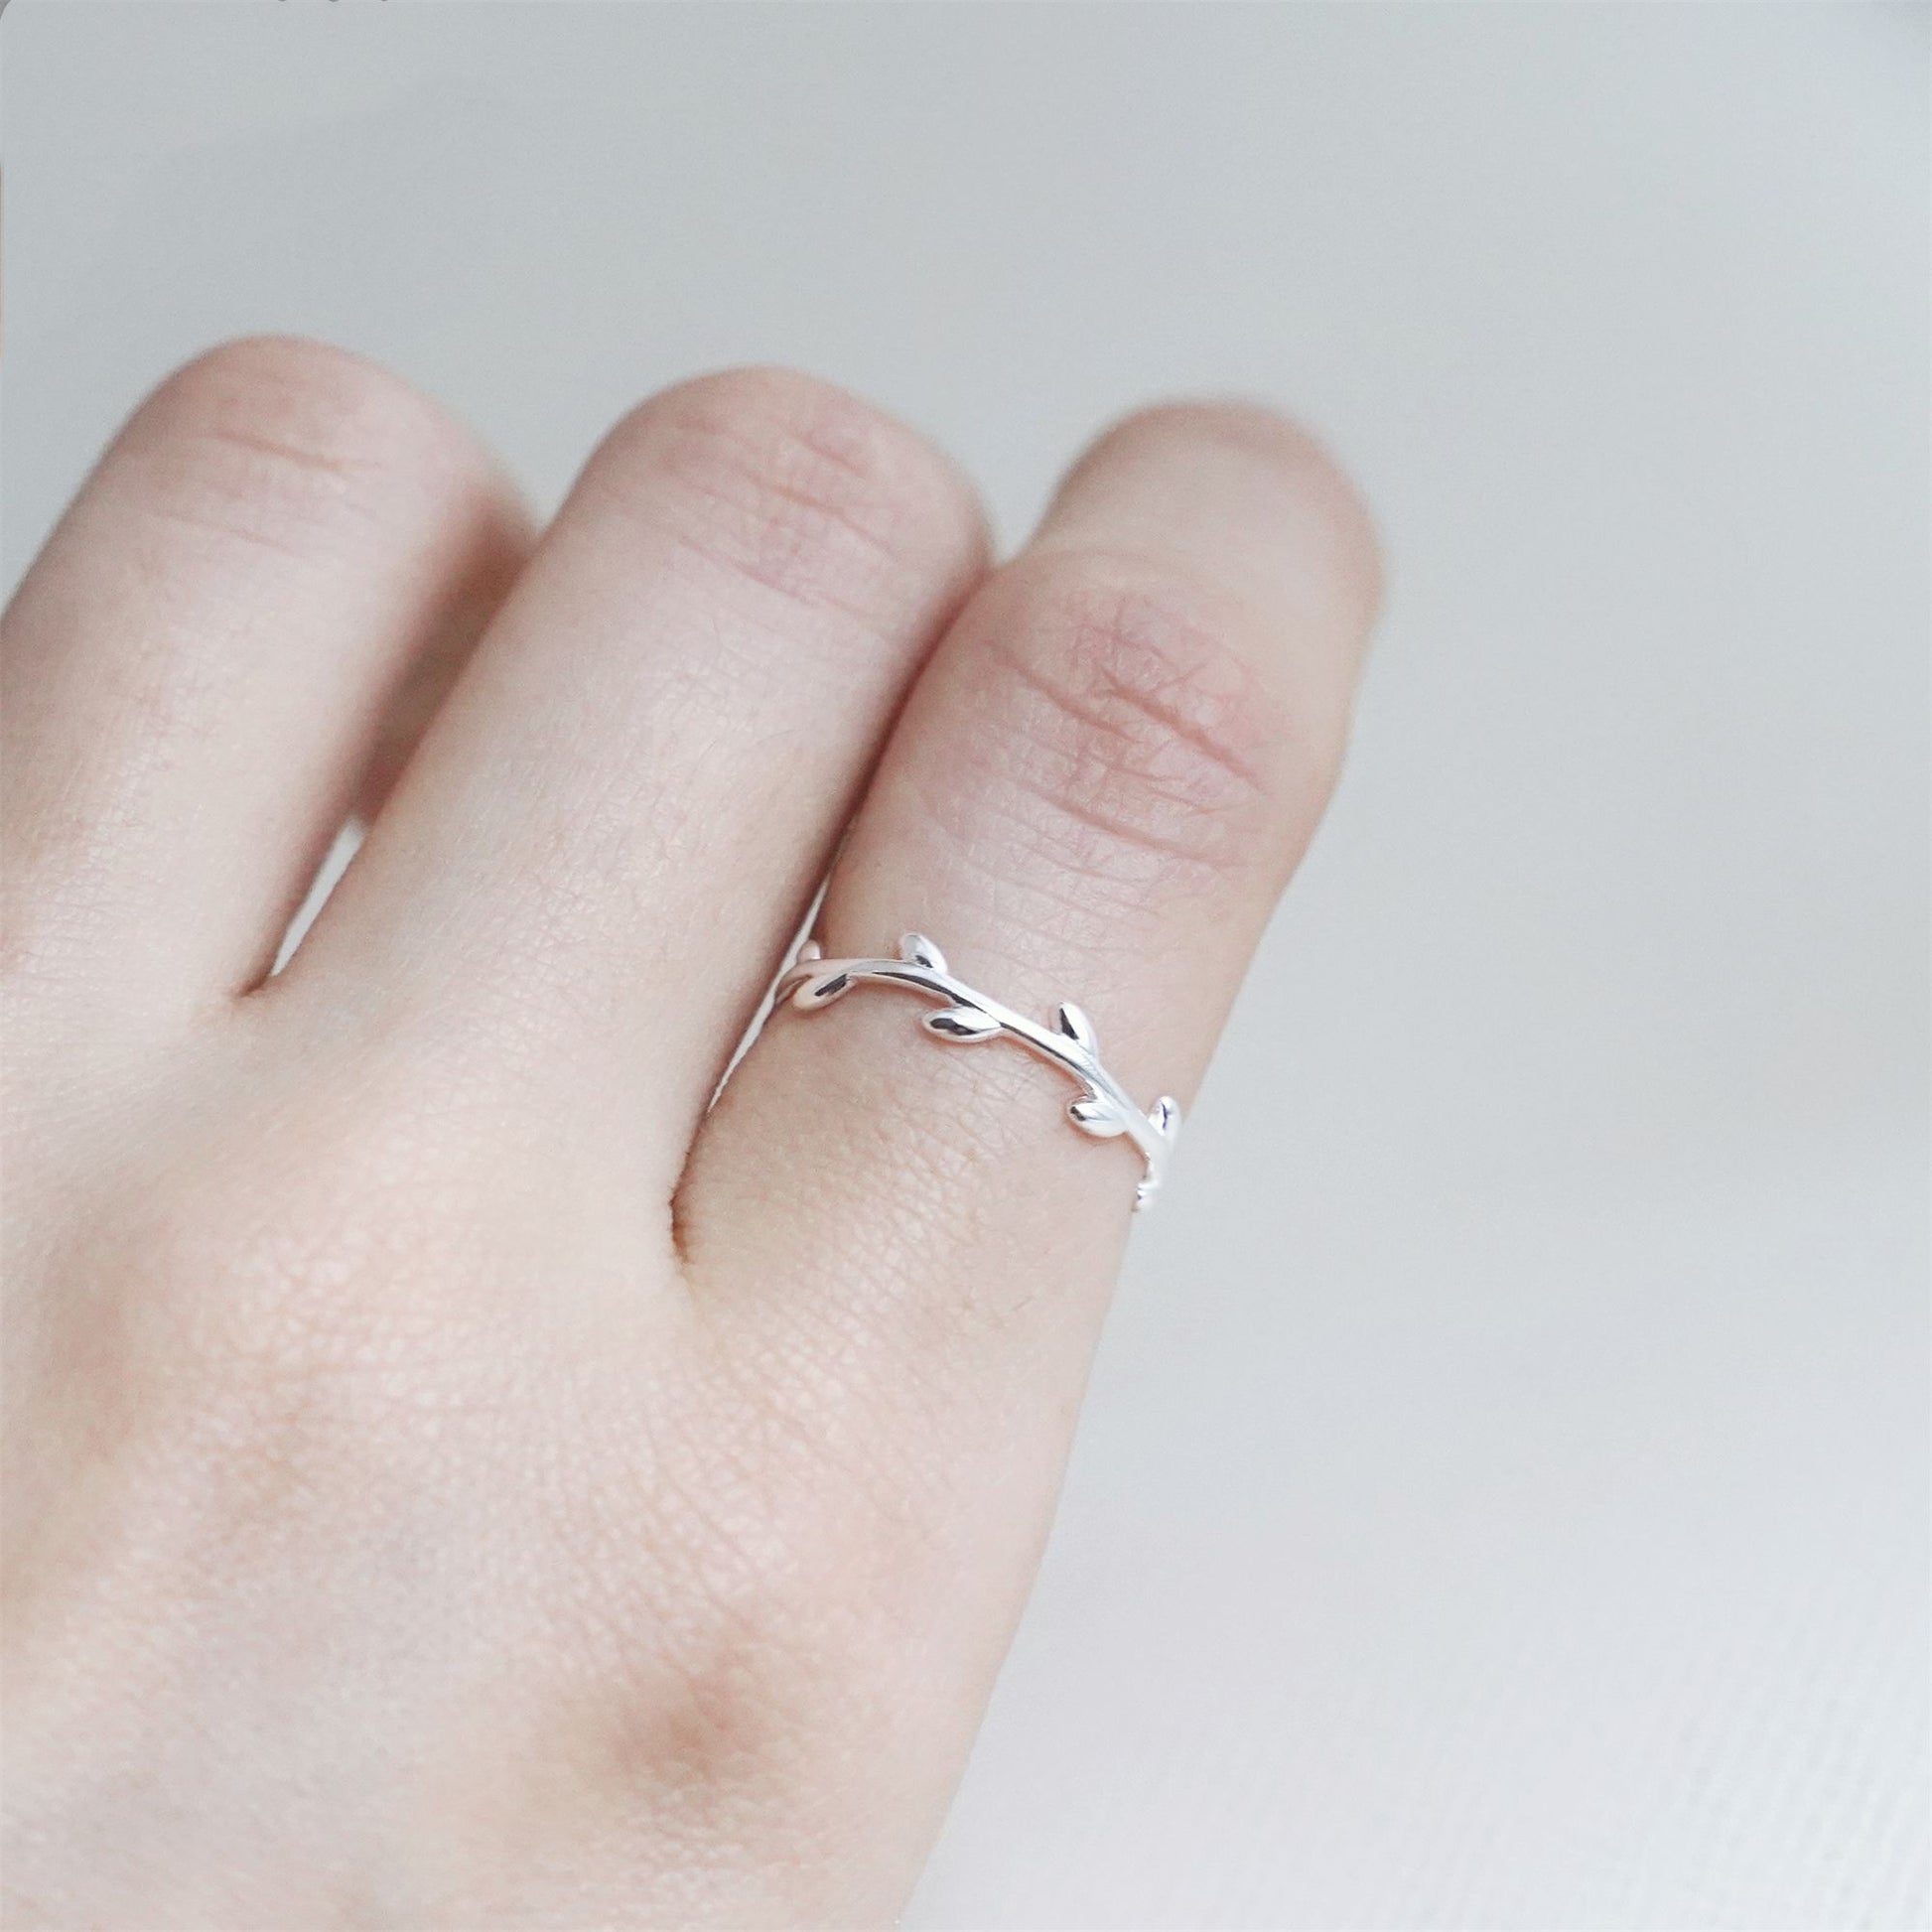 Sterling Silver Olive Wreath Leaf Thin Knuckle Open Band Ring UK J Sizable Boxed - sugarkittenlondon